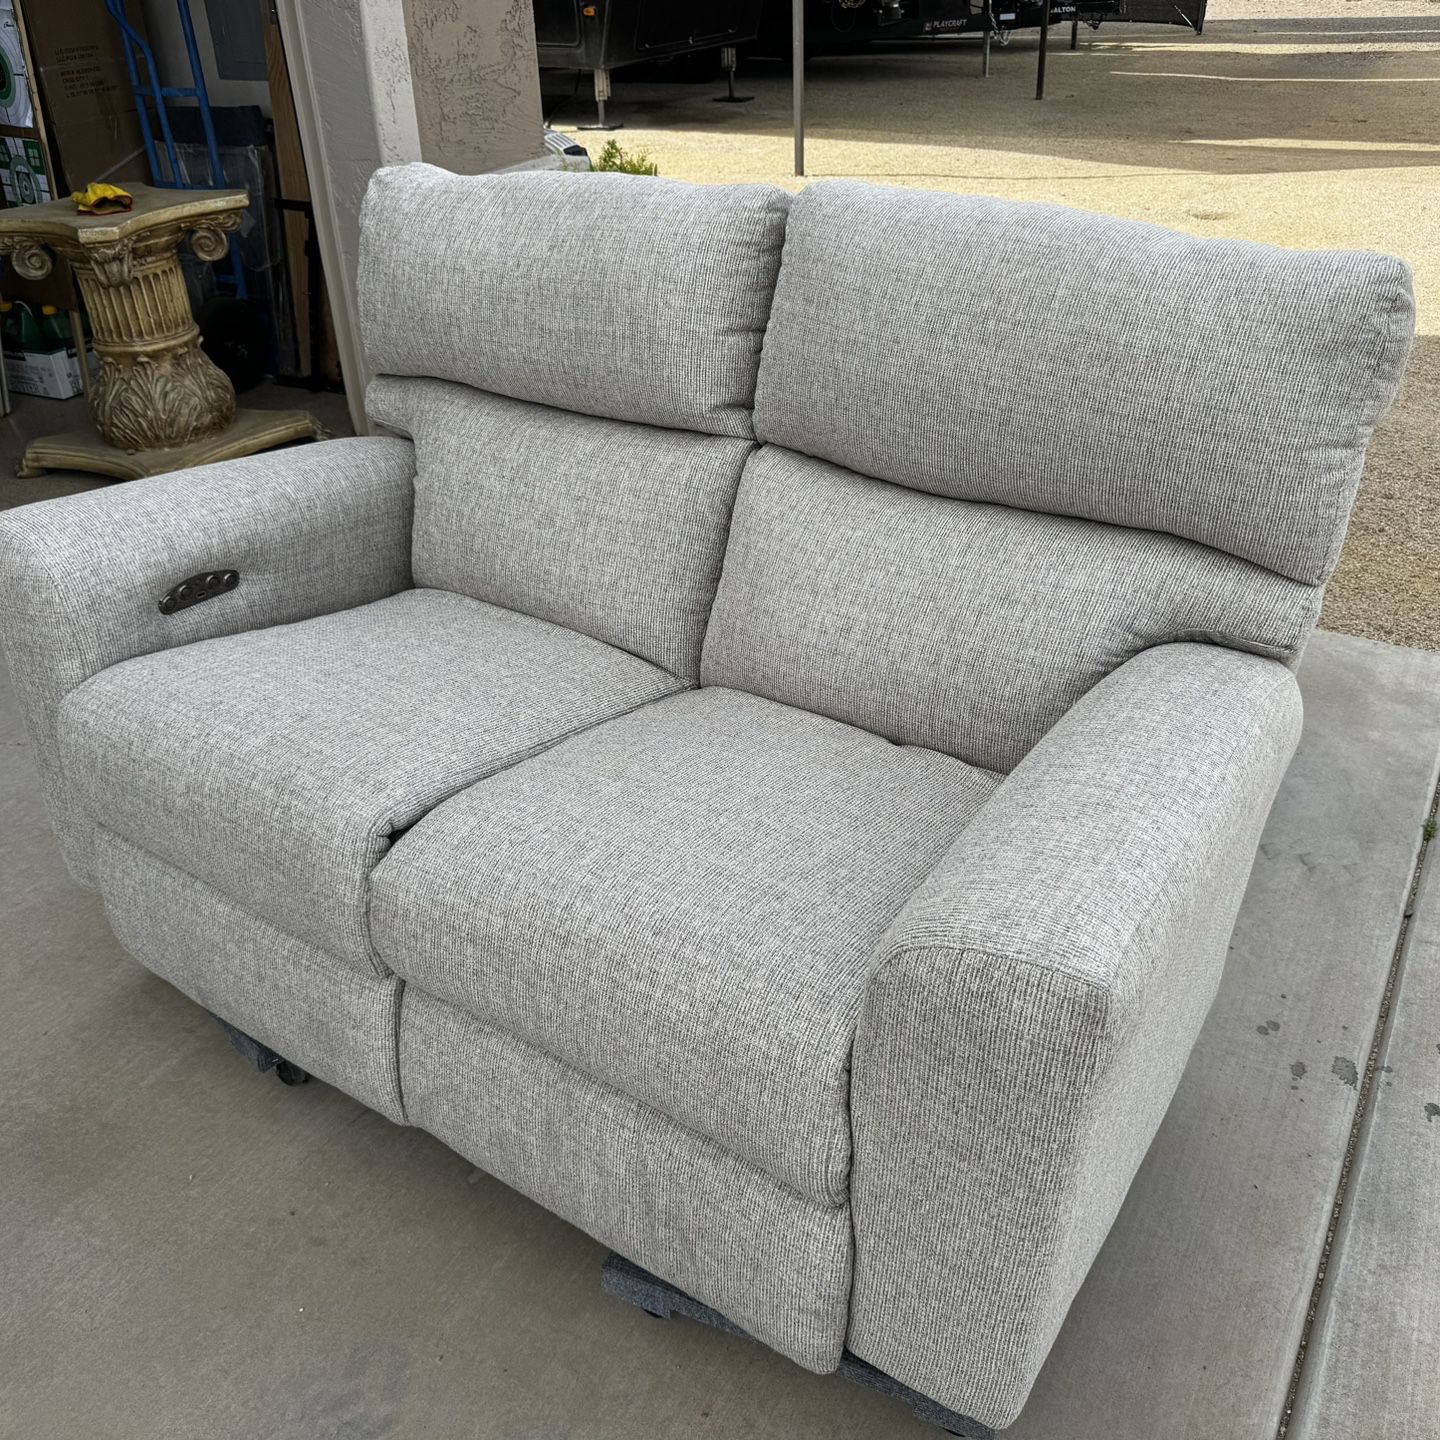 New (Never used) Luxury Dual Reclining Love Seat